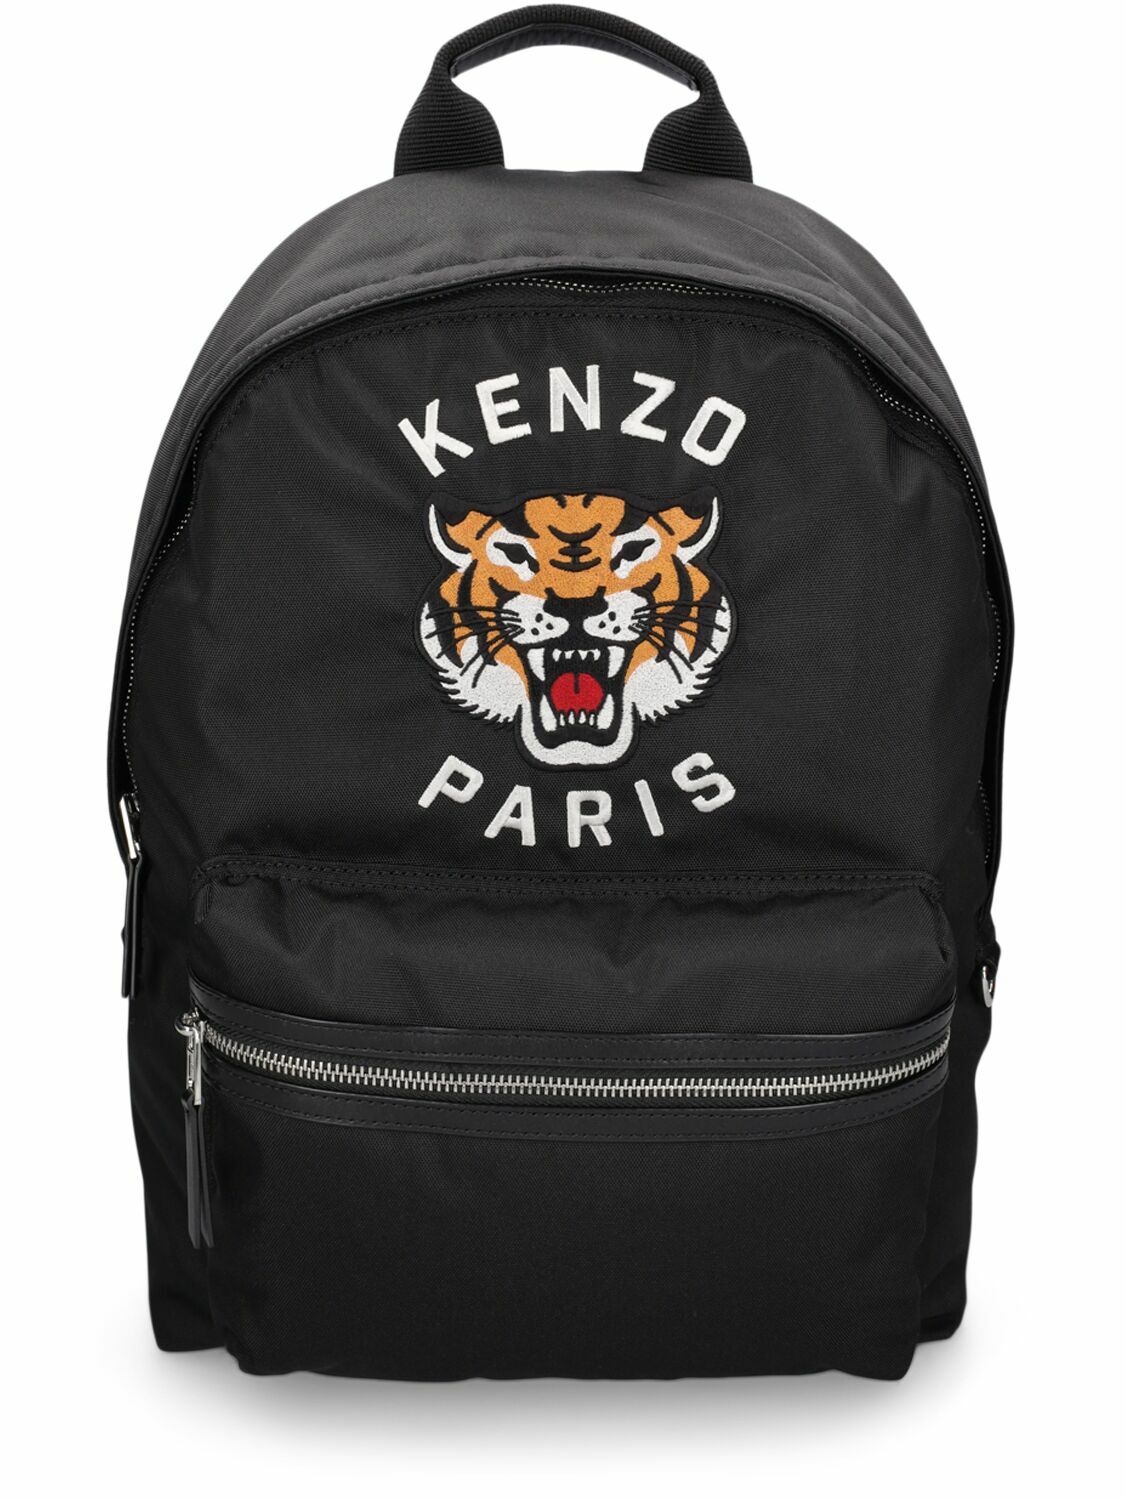 Totes bags Kenzo - Kenzo Paris tote - 5SF219F2421 | Shop online at THEBS